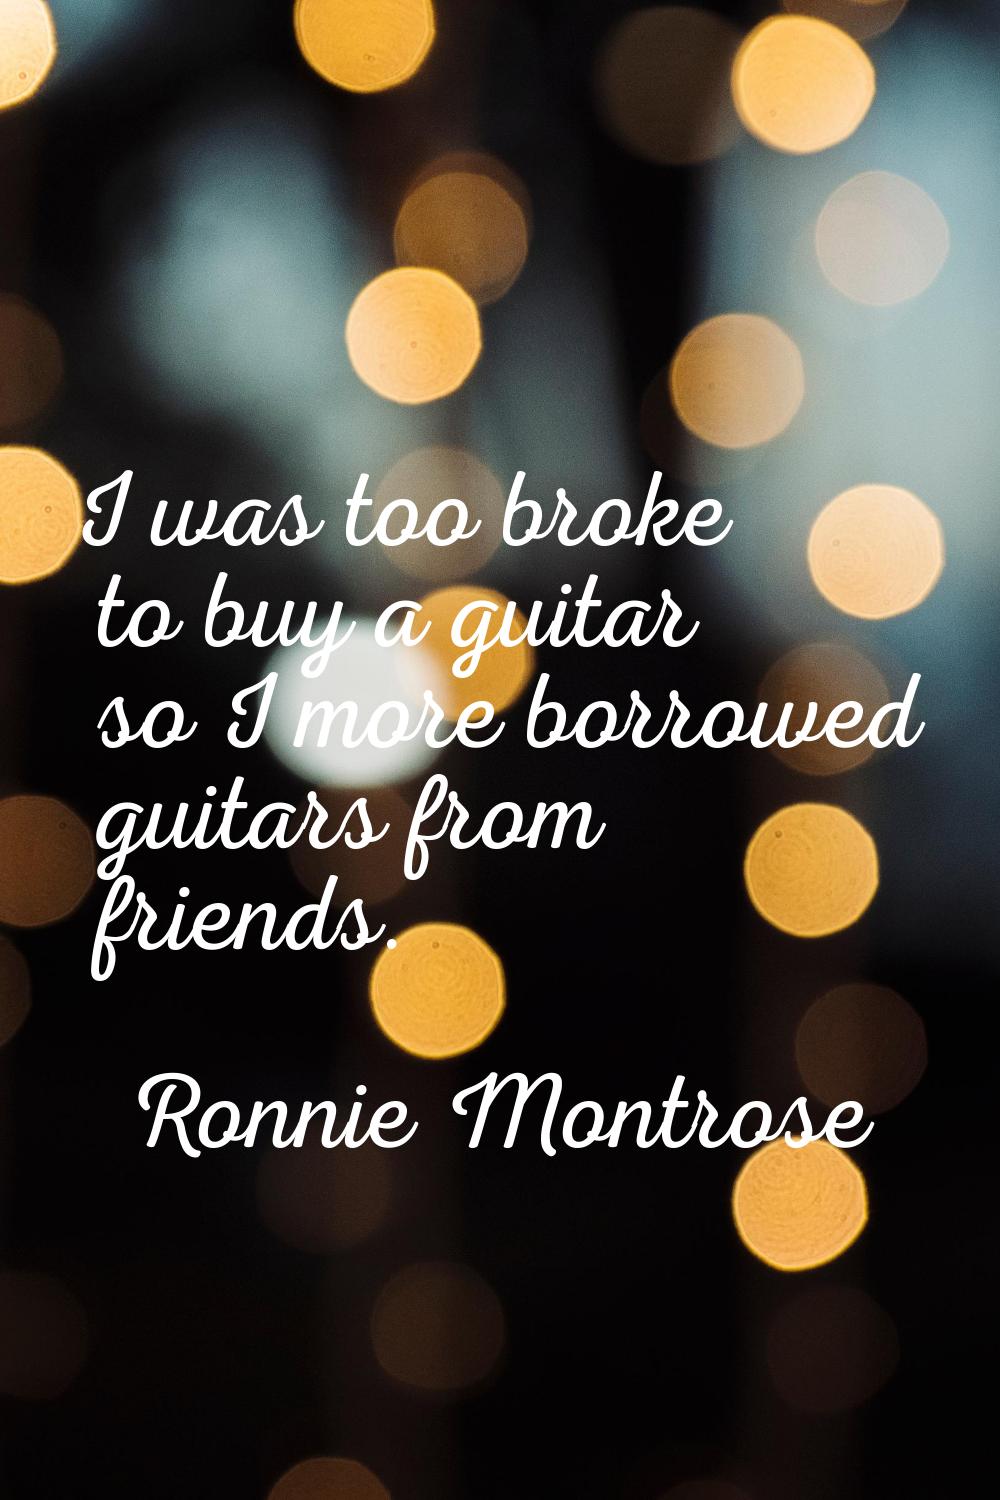 I was too broke to buy a guitar so I more borrowed guitars from friends.